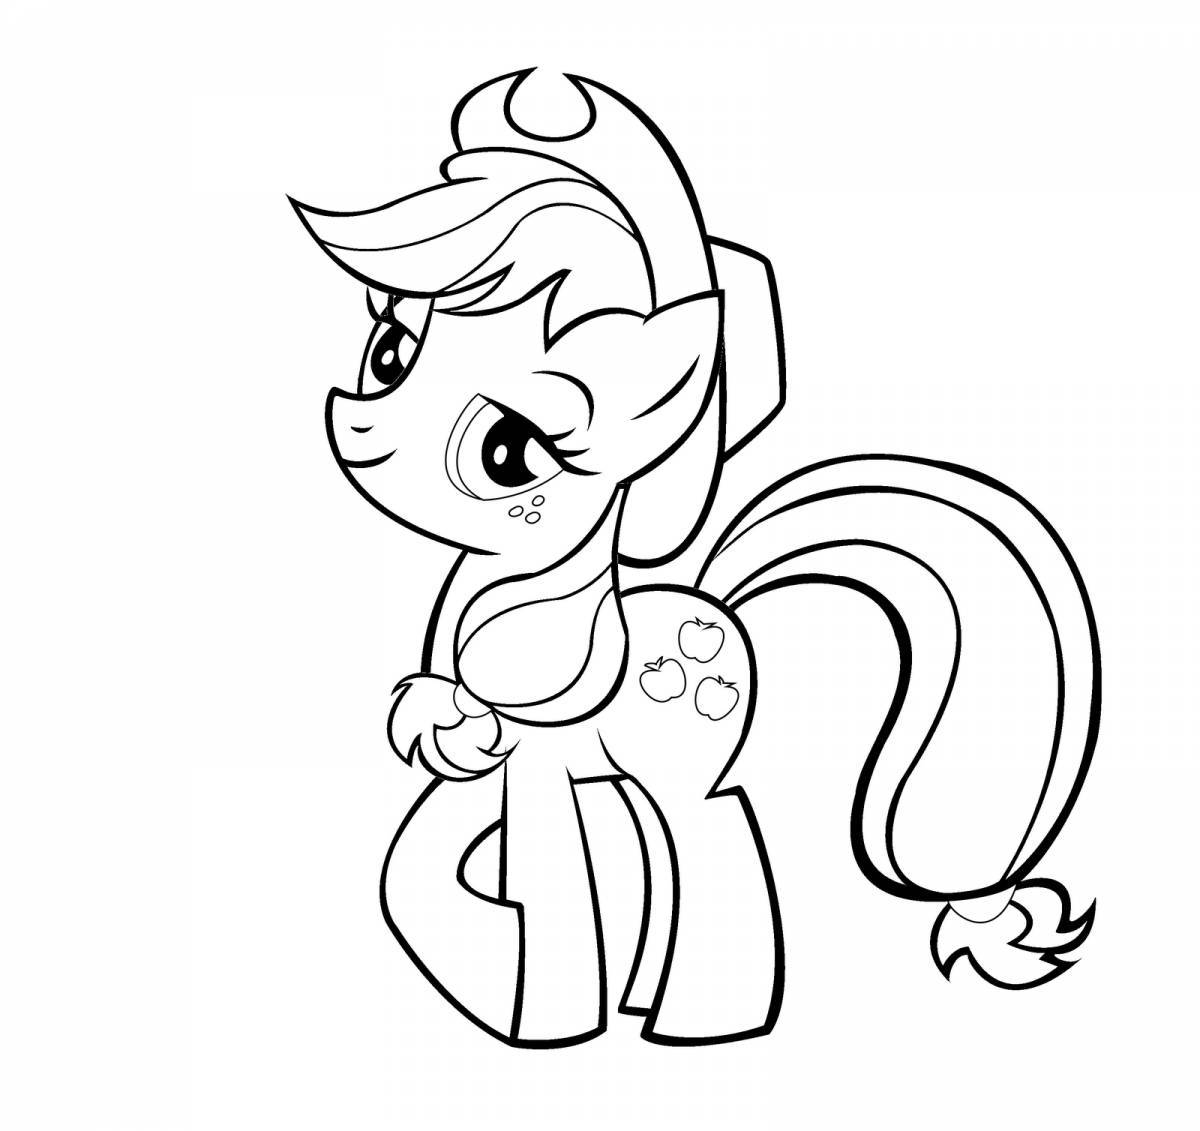 Coloring page live my little pony